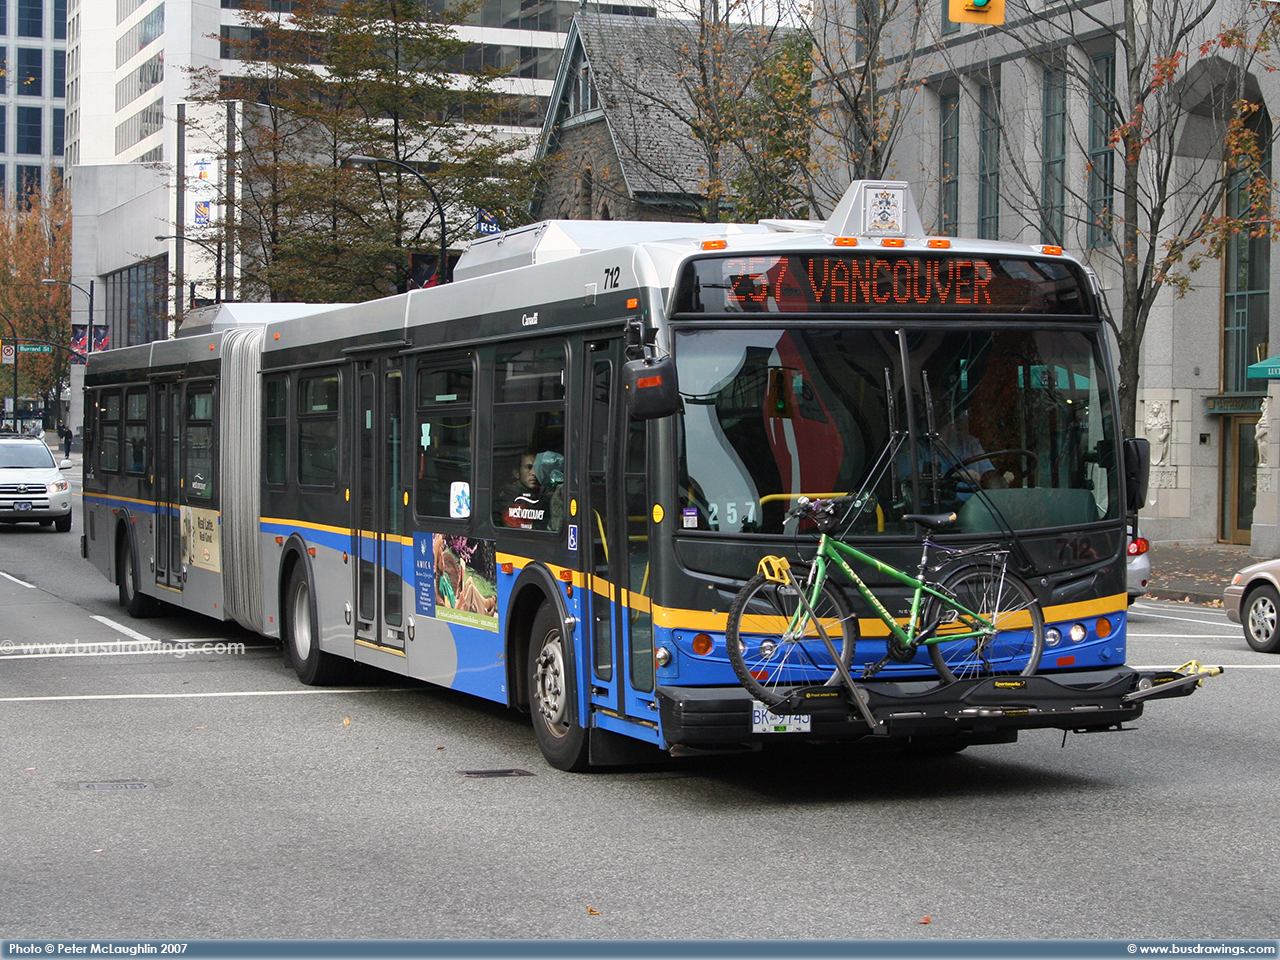 A bus with a bicycle on the front

Description automatically generated